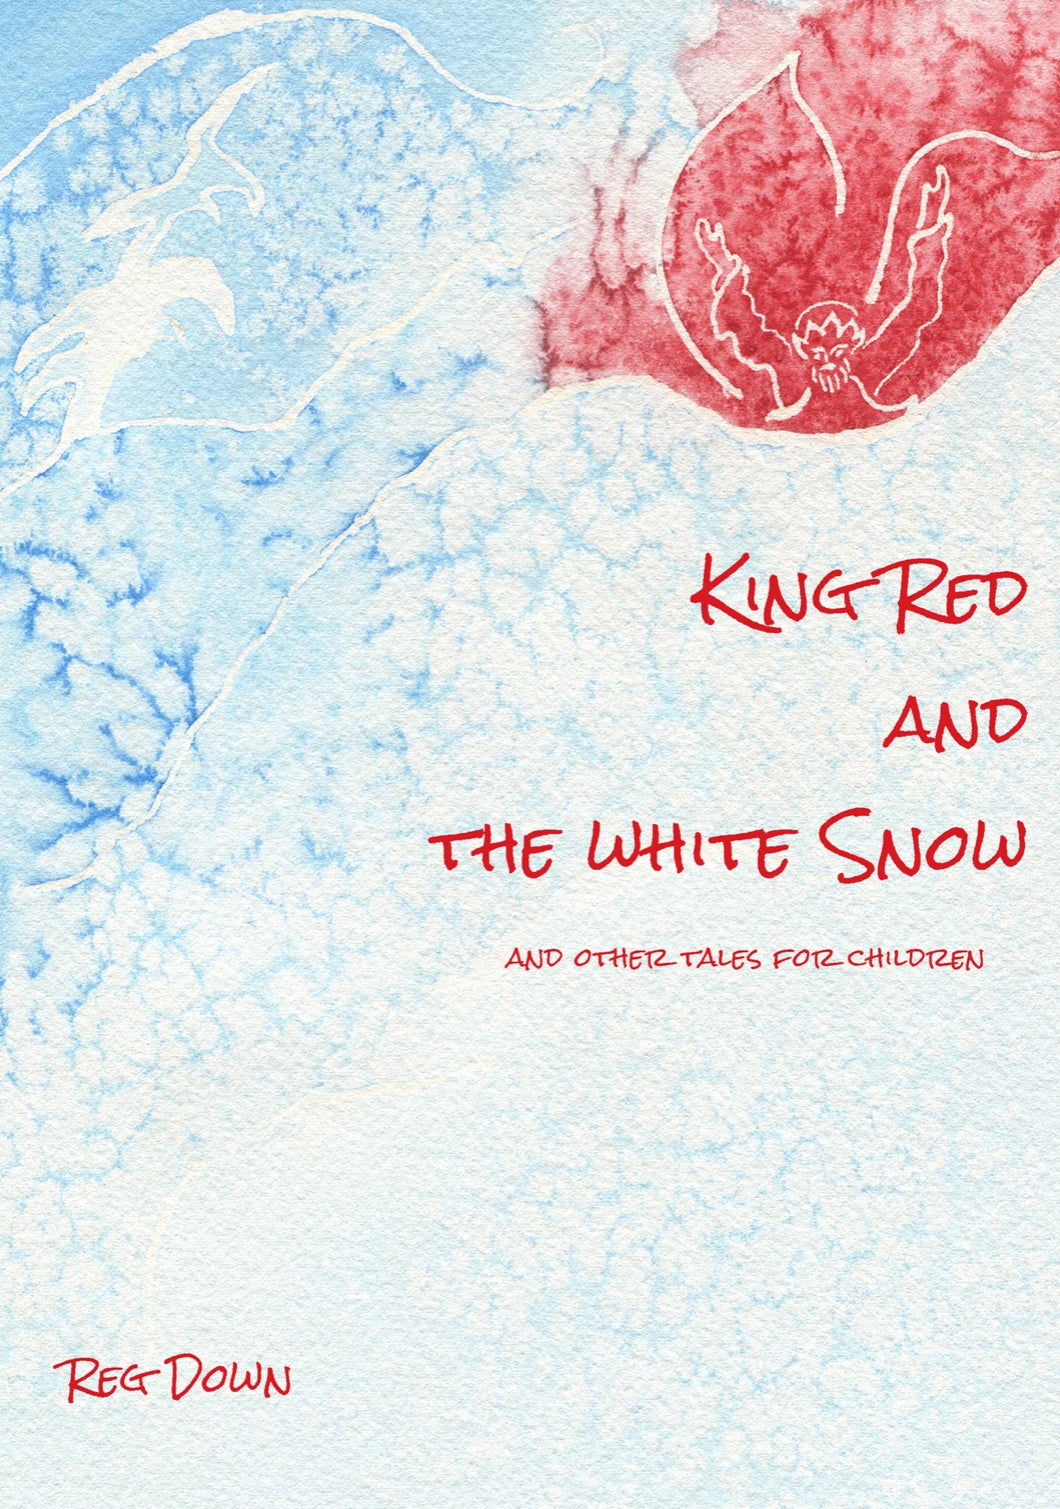 King Red and The White Snow and Other Tales for Children by Reg Down - Alder & Alouette